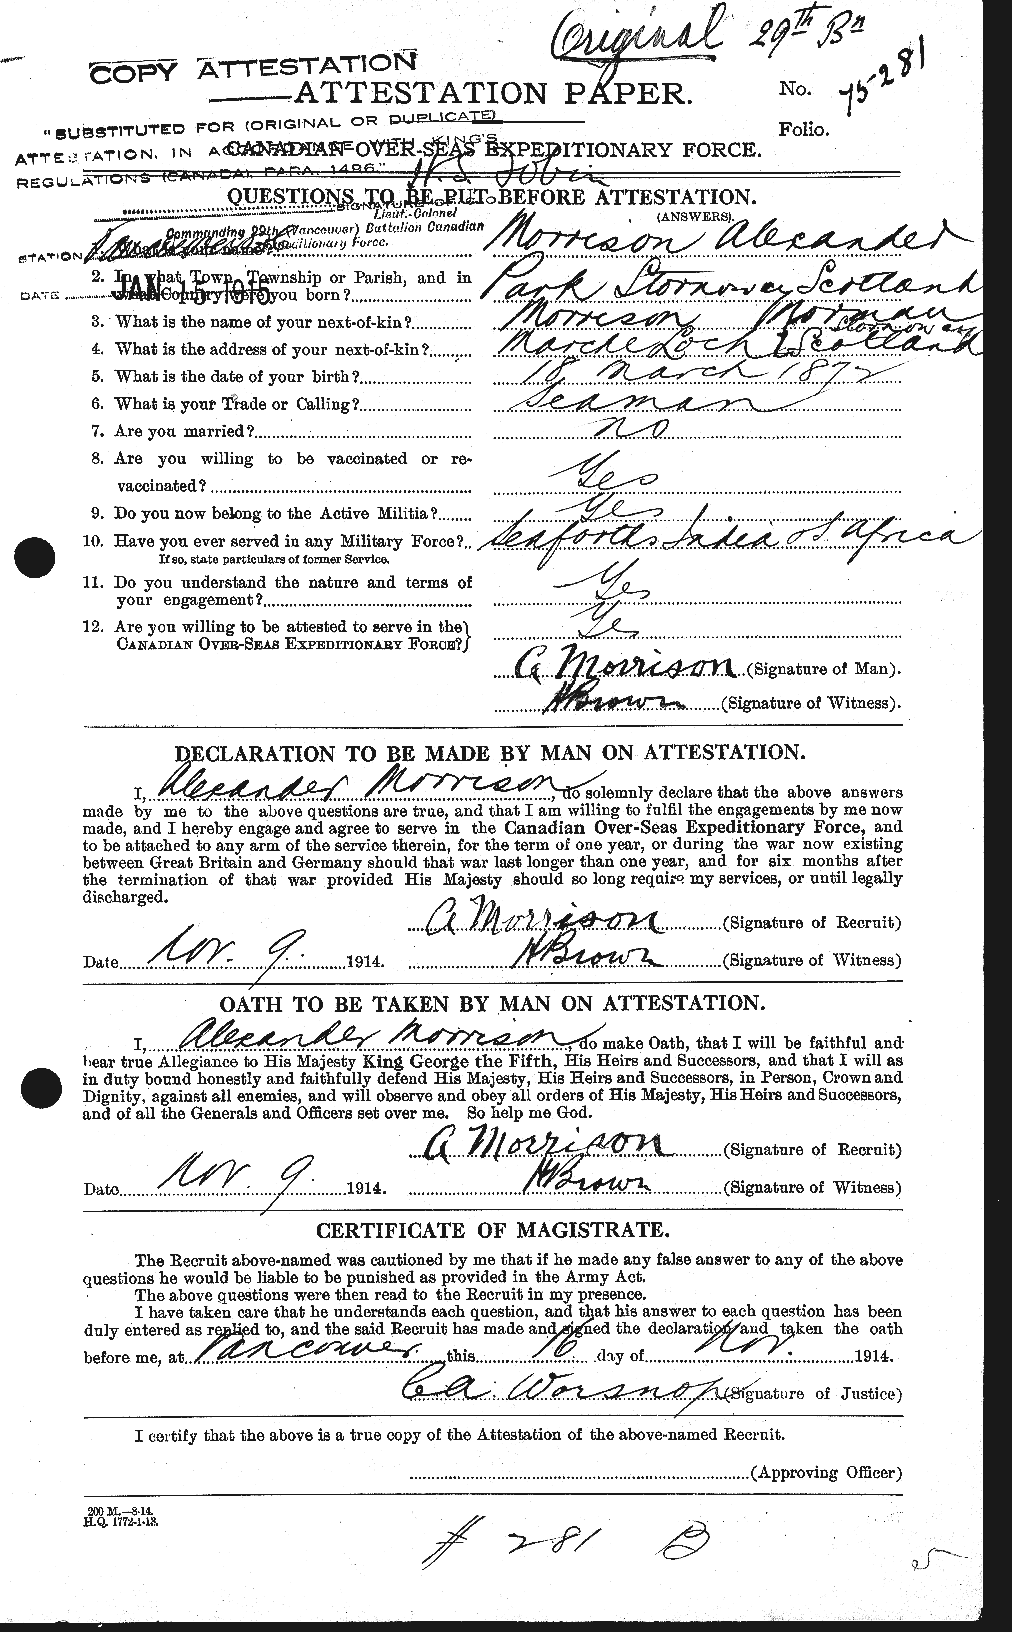 Personnel Records of the First World War - CEF 510982a